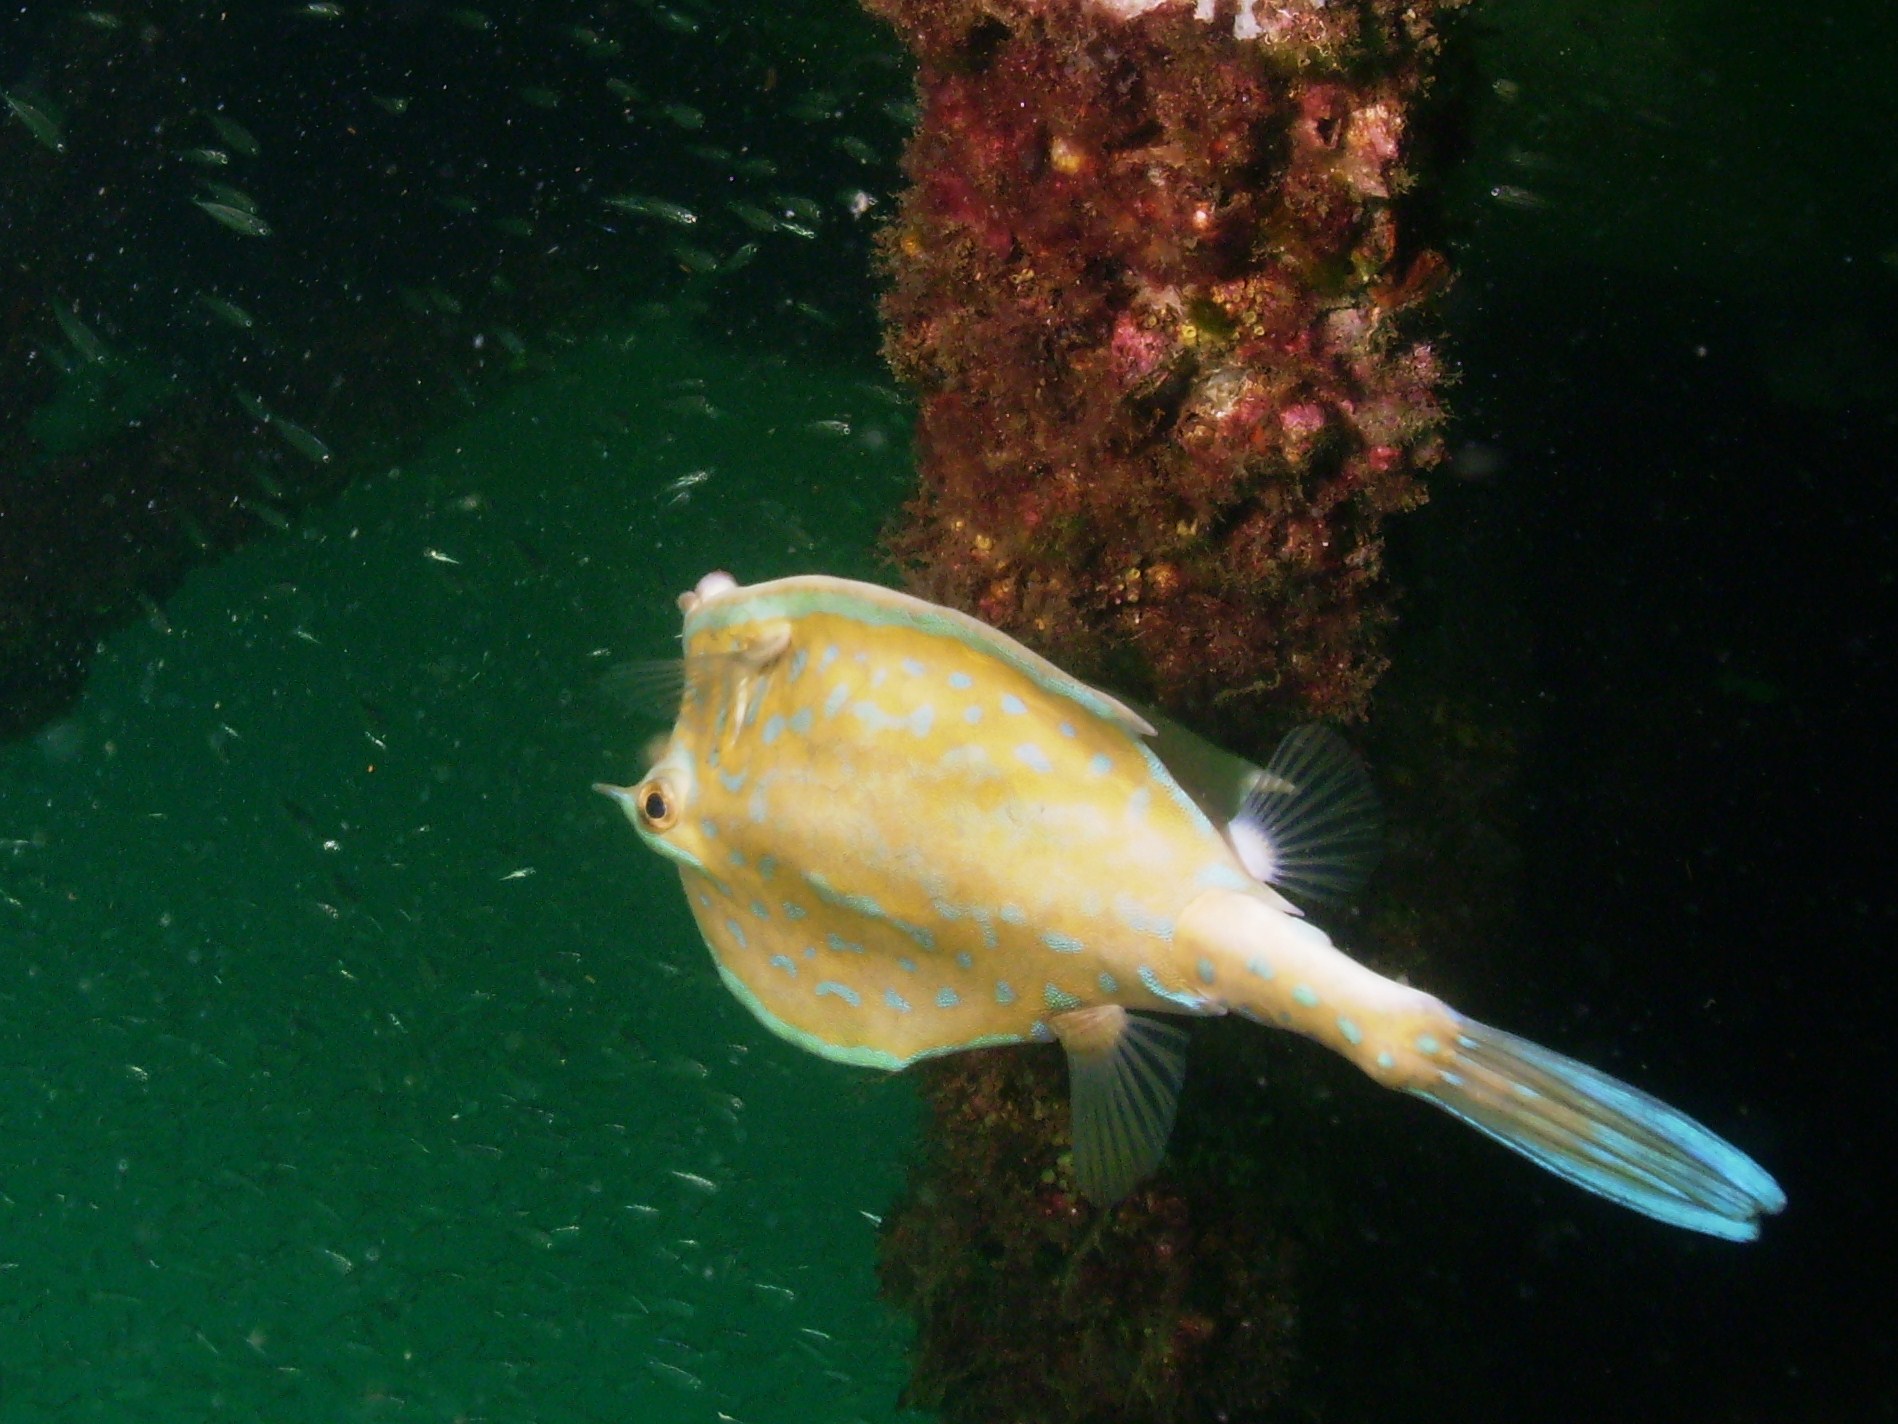 Cowfish at the coal barges (specific type?)